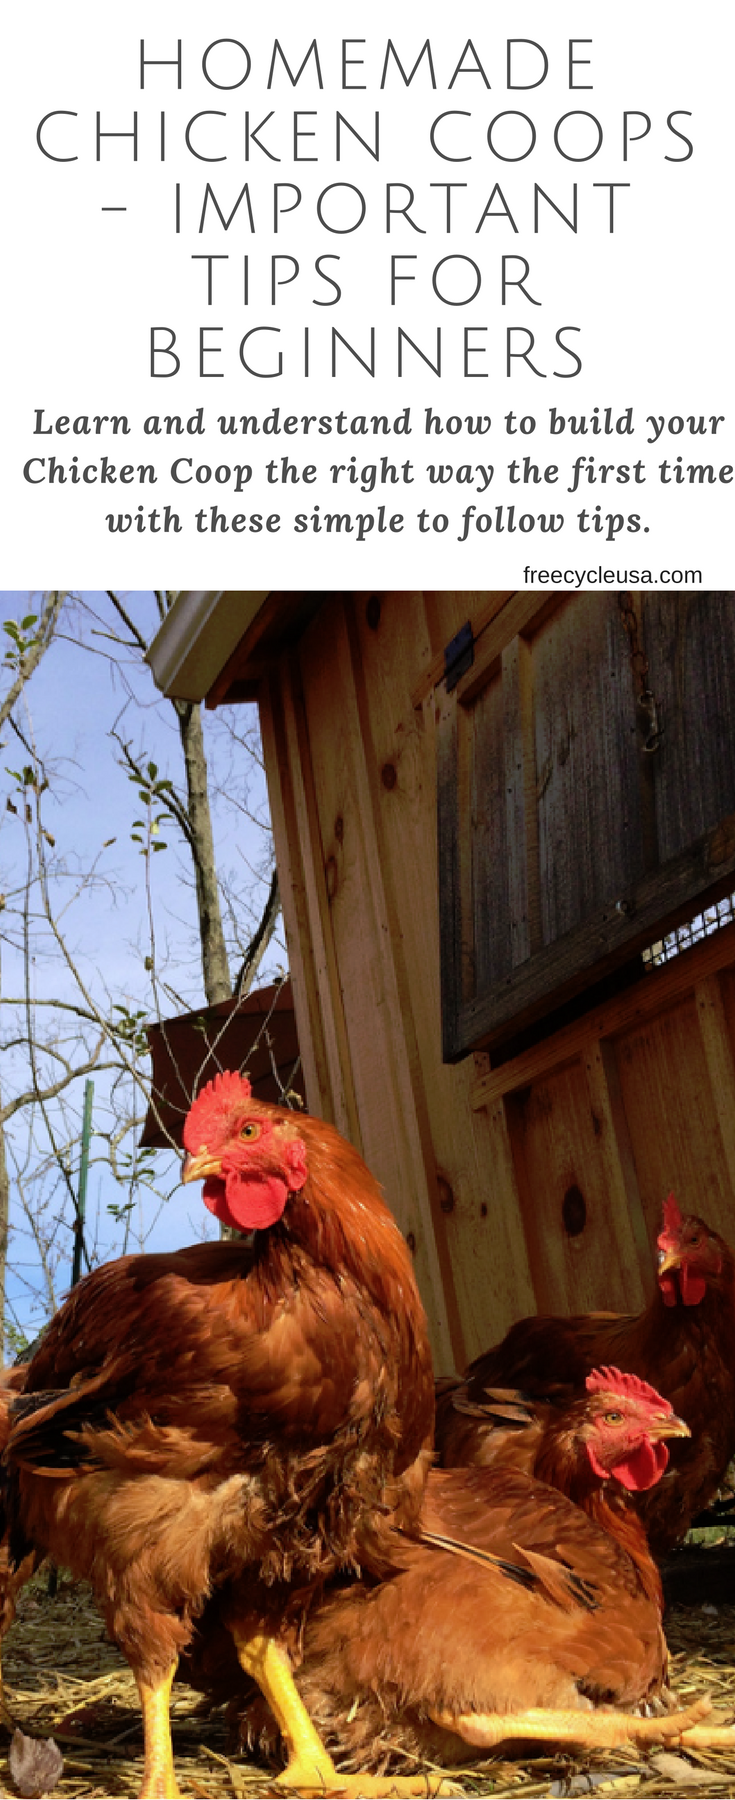 HOMEMADE CHICKEN COOPS - IMPORTANT TIPS FOR BEGINNERS